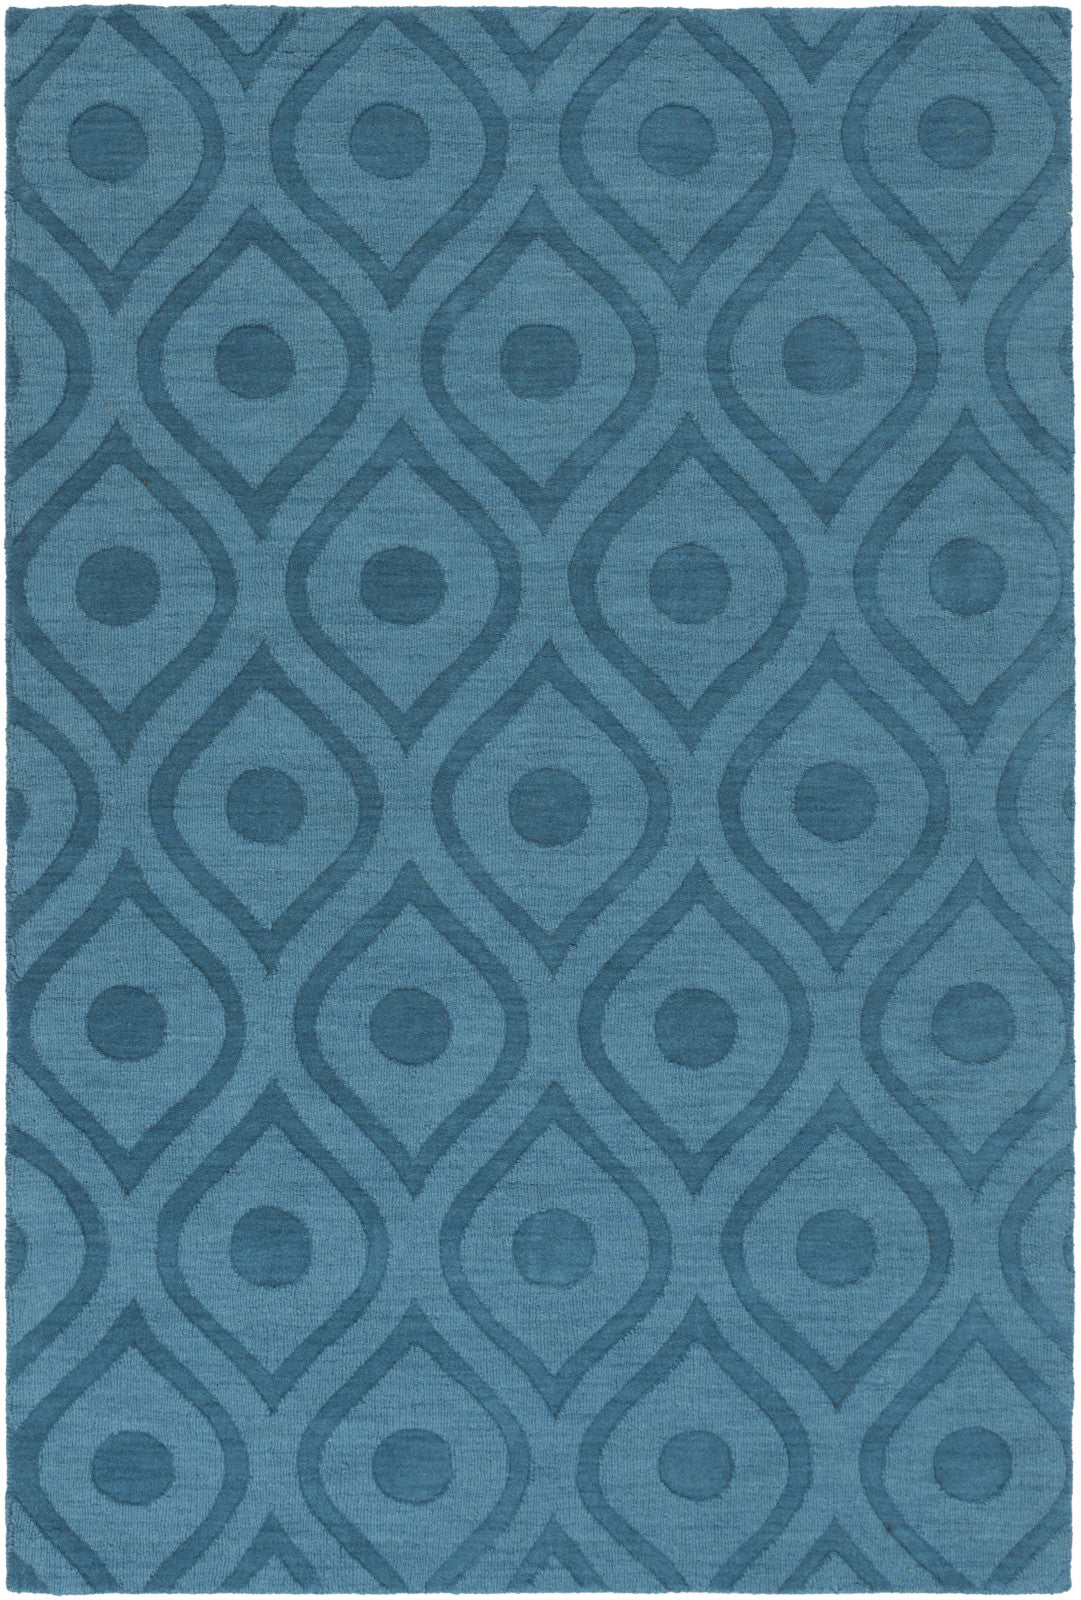 Artistic Weavers Central Park Zara Turquoise Area Rug main image